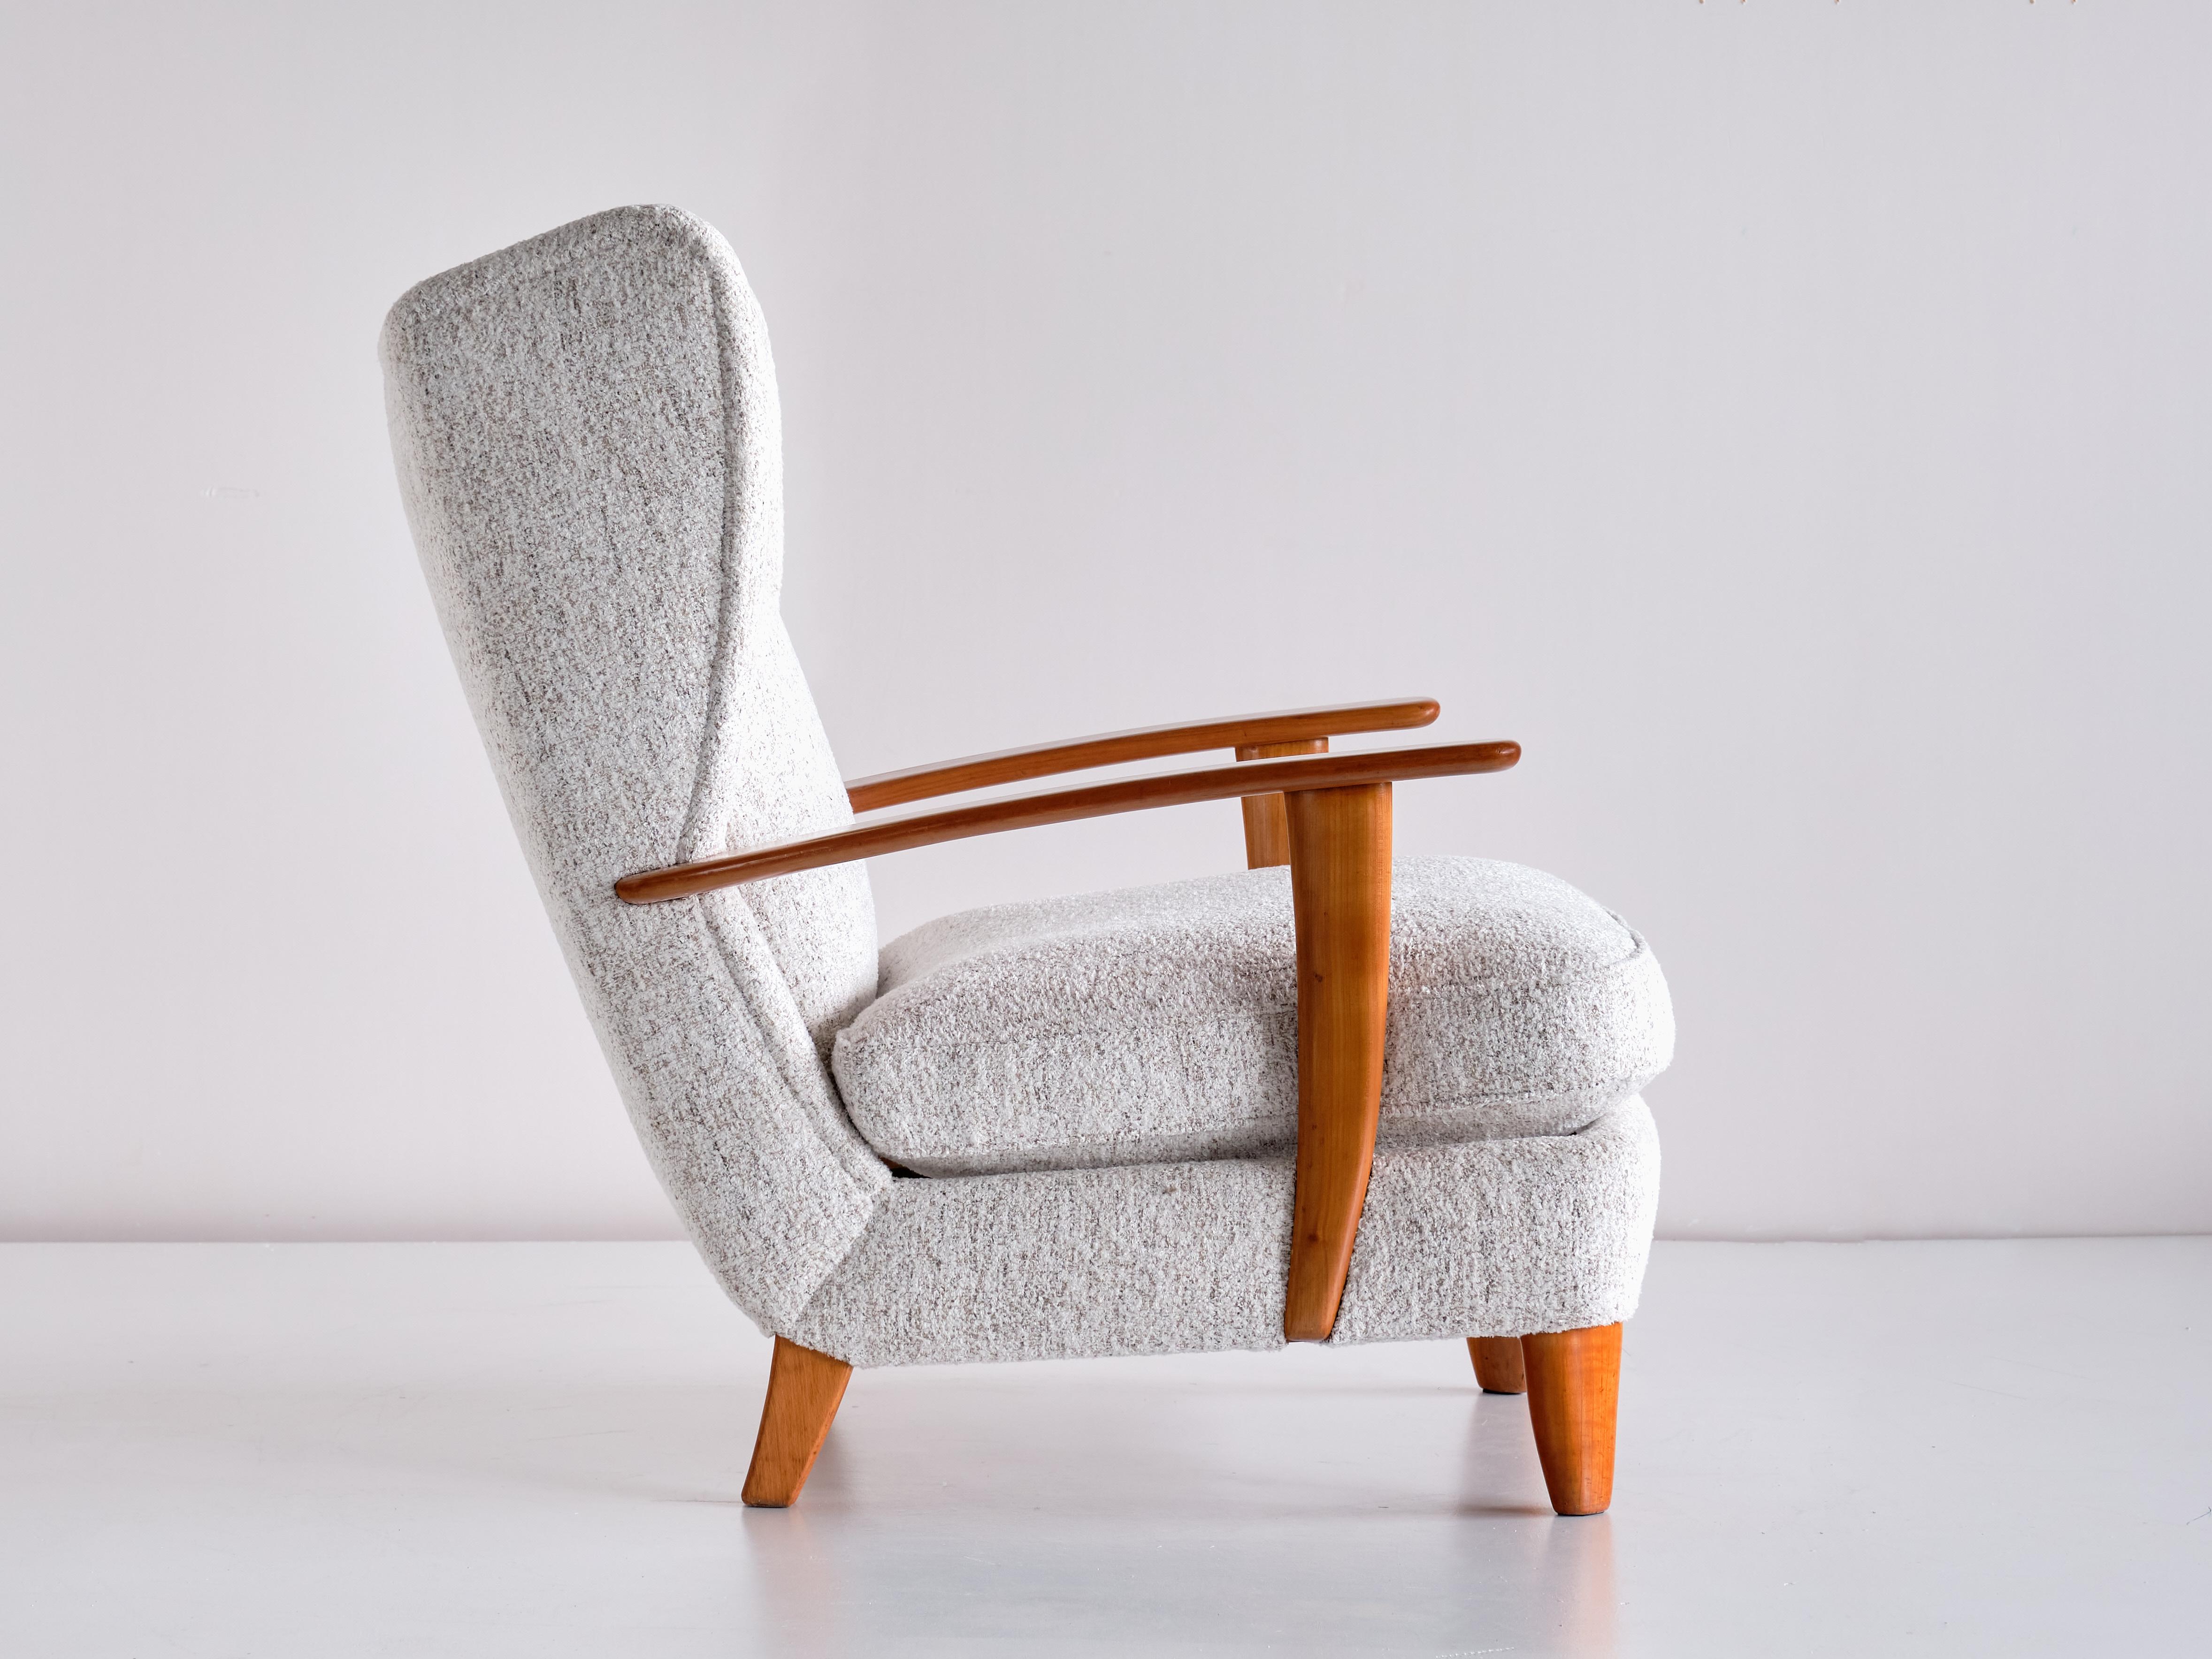 Early 20th Century Gio Ponti Wingback Chair in Cherry Wood and Mélange Nobilis Fabric, Italy, 1929 For Sale